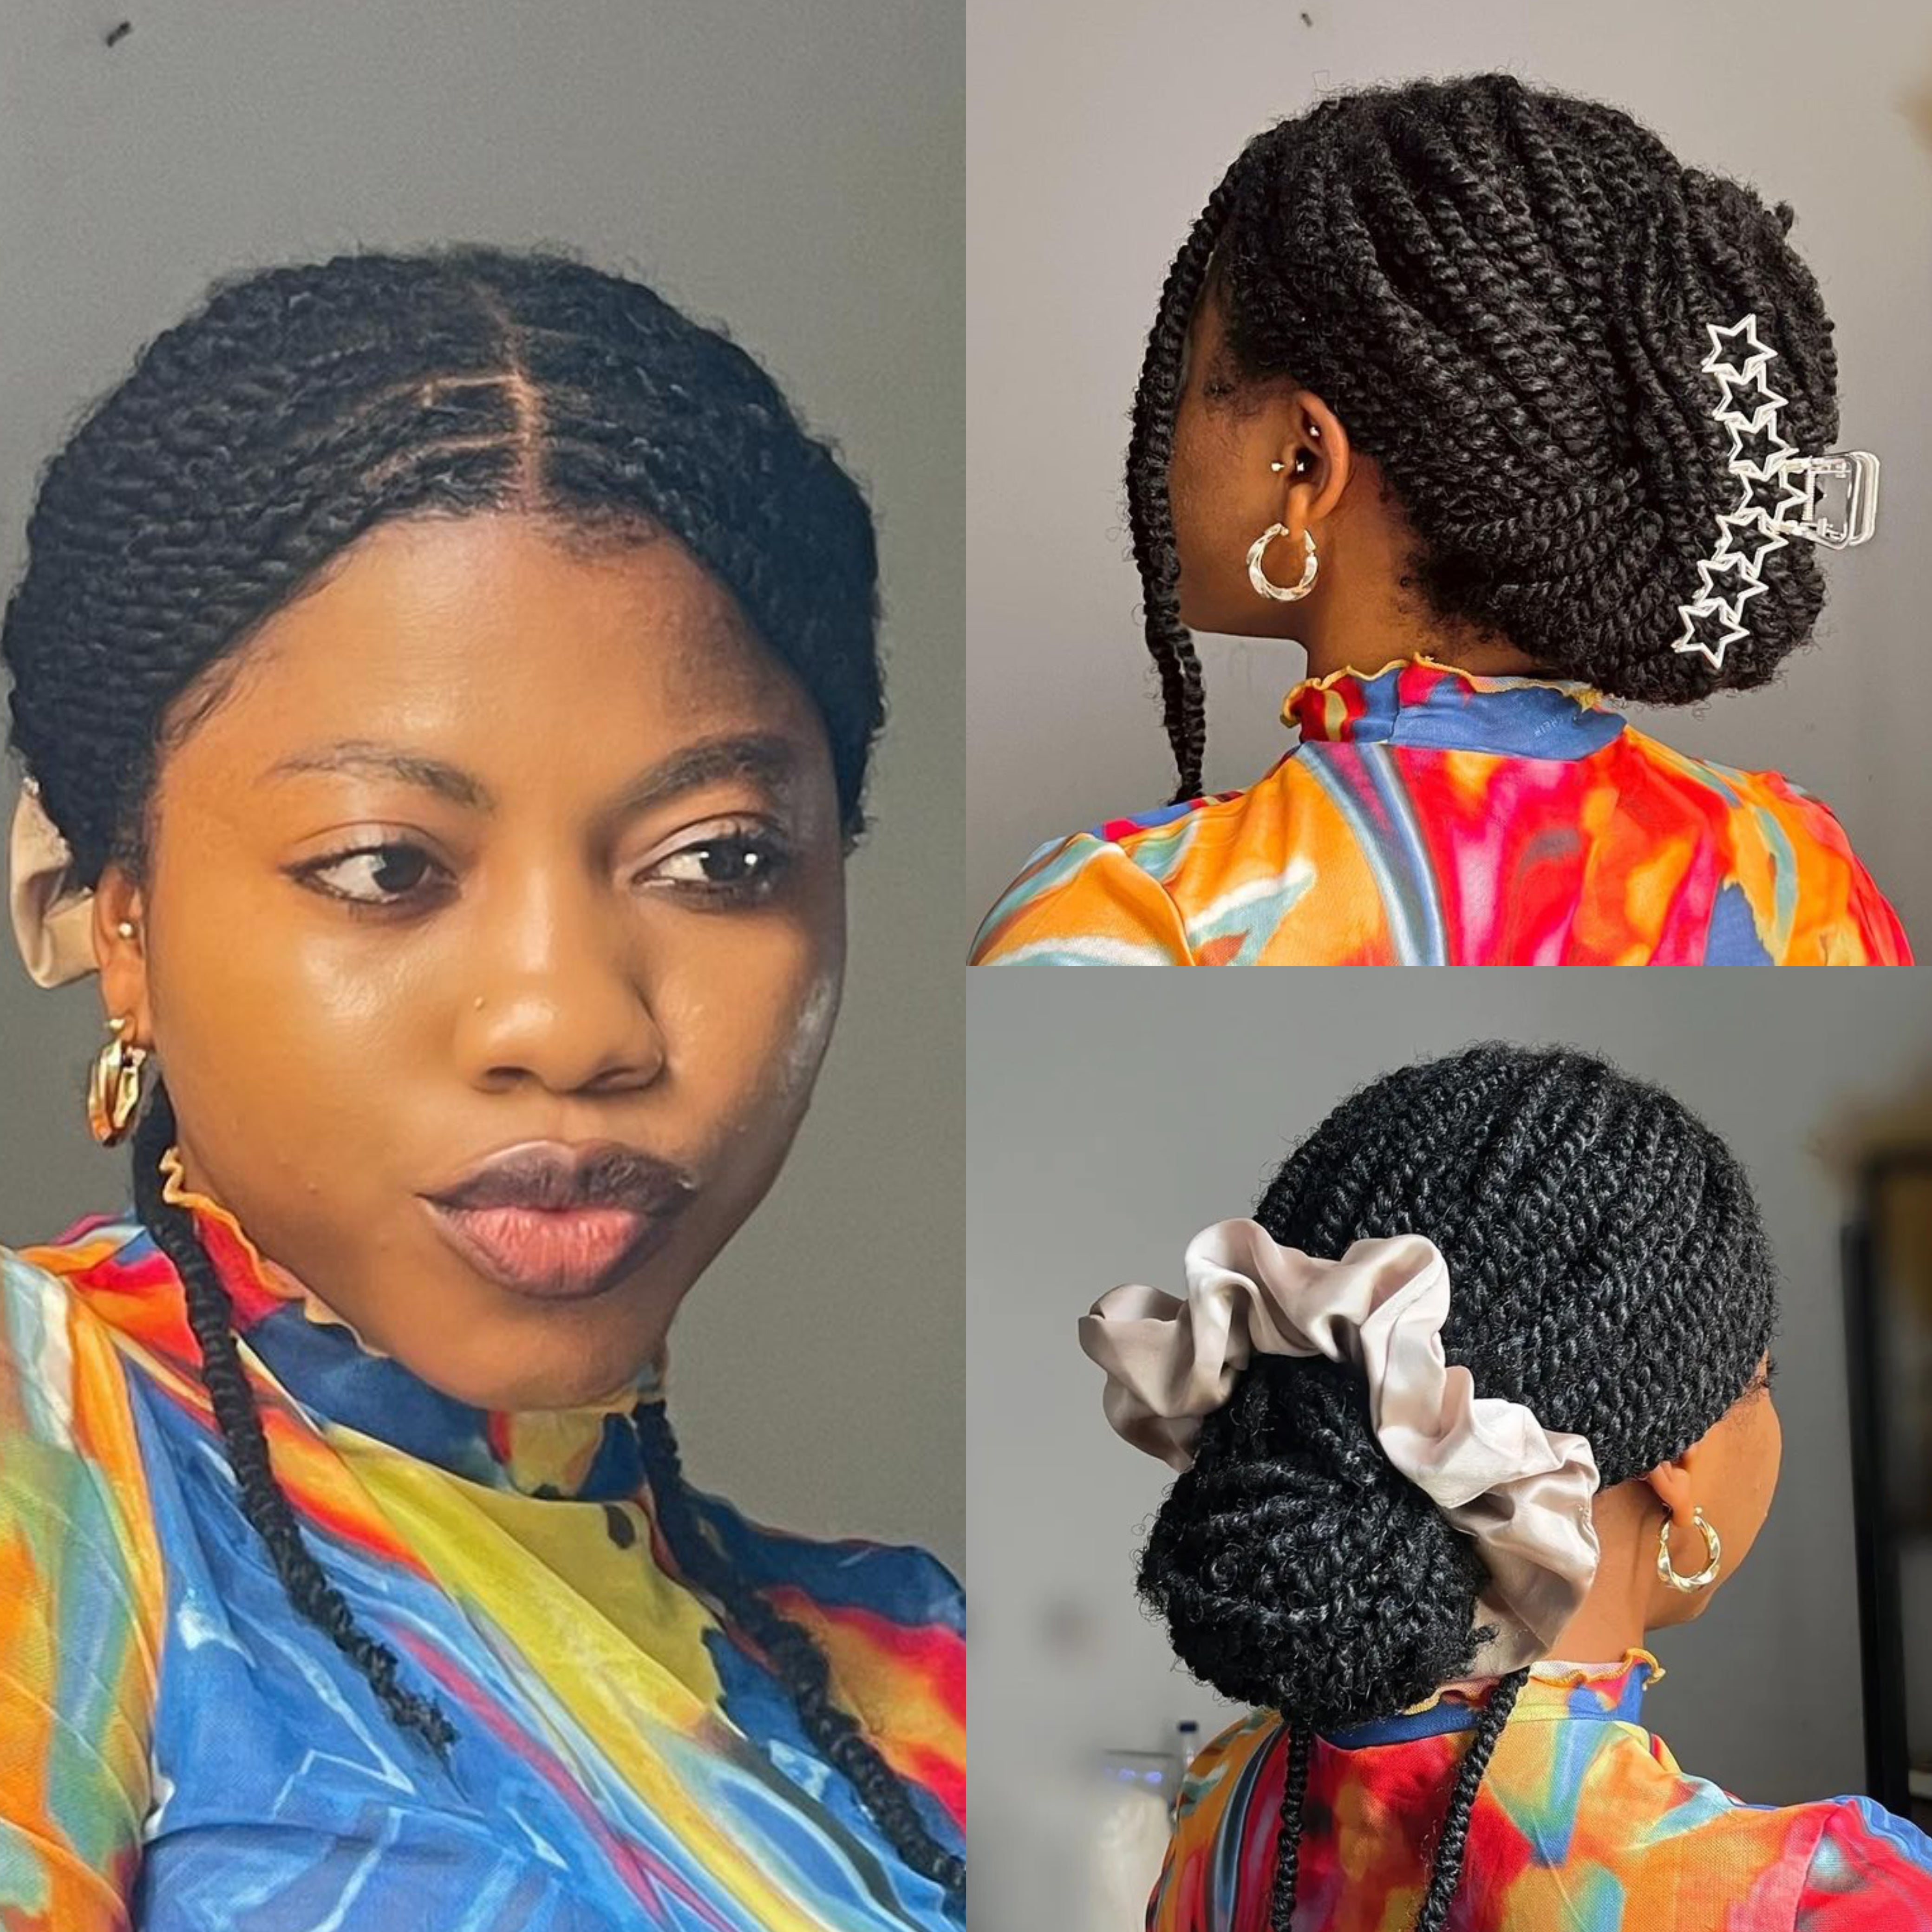 Springy Afro Twist Hair 12